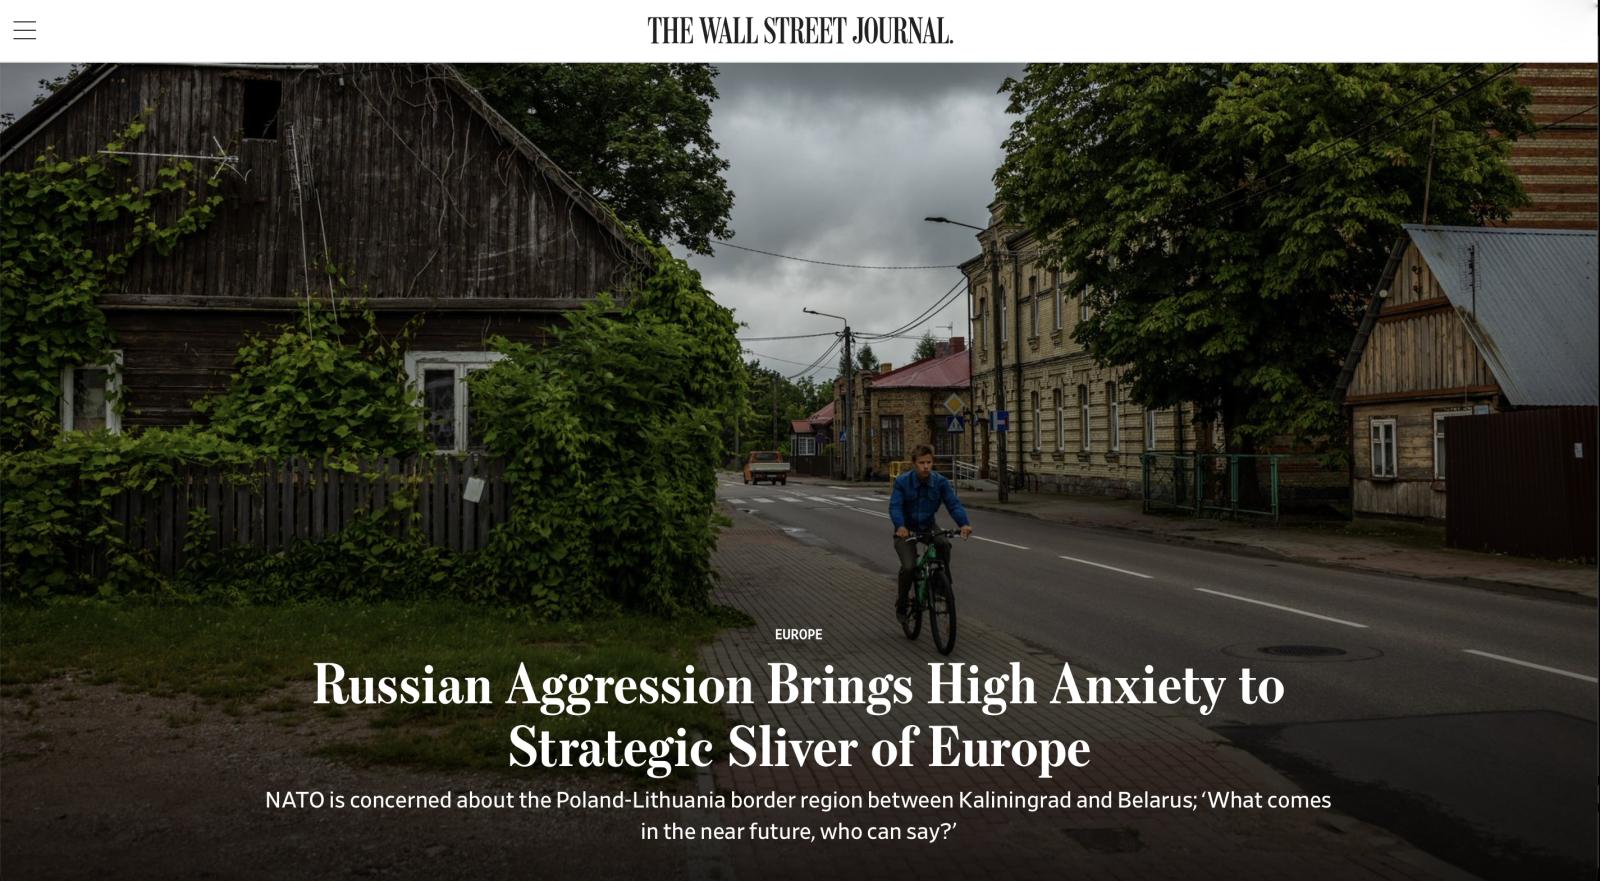 Russian Aggression Brings High Anxiety to Strategic Sliver of Europe